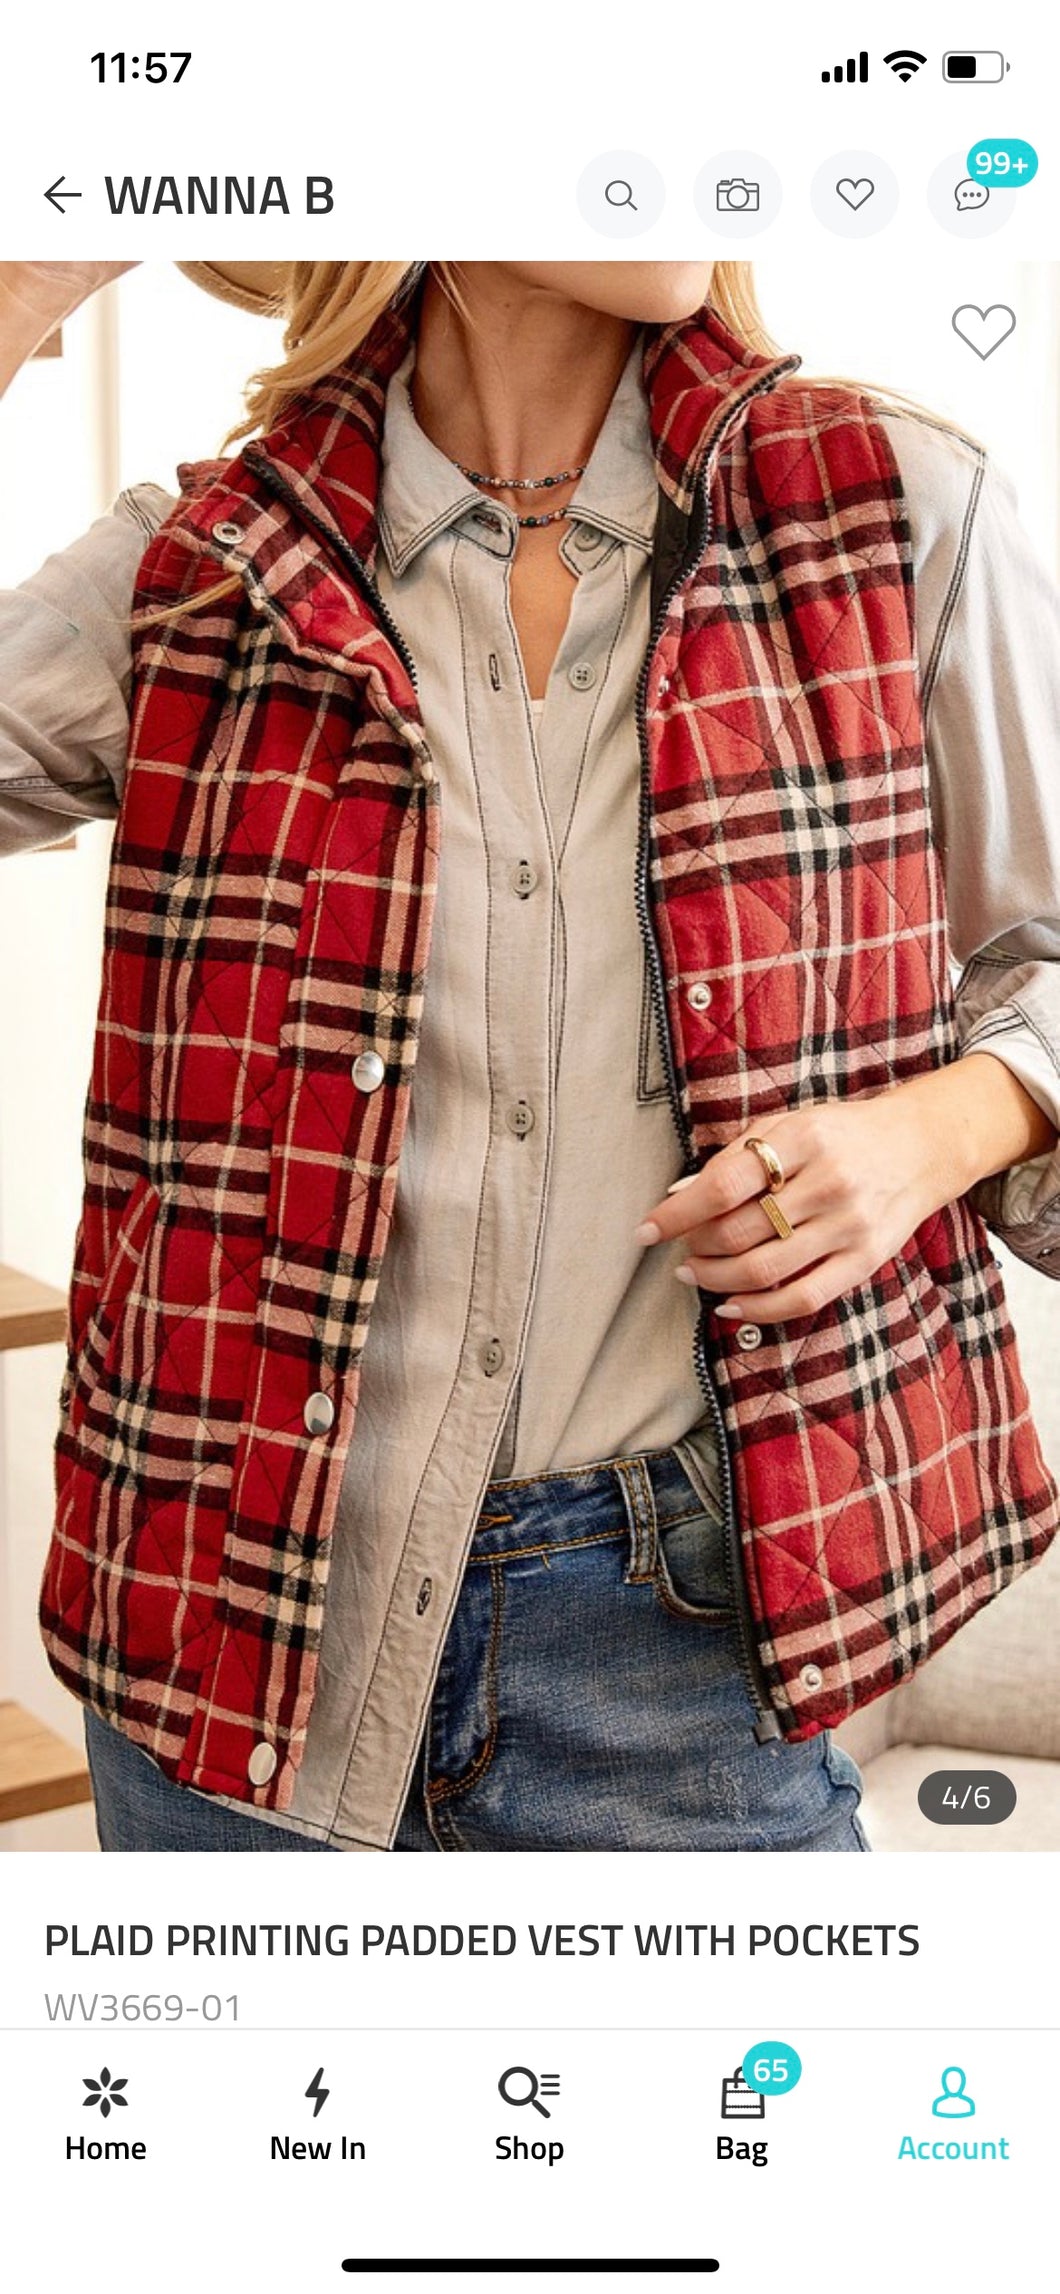 M-PLAID PRINTING PADDED VEST WITH POCKETS